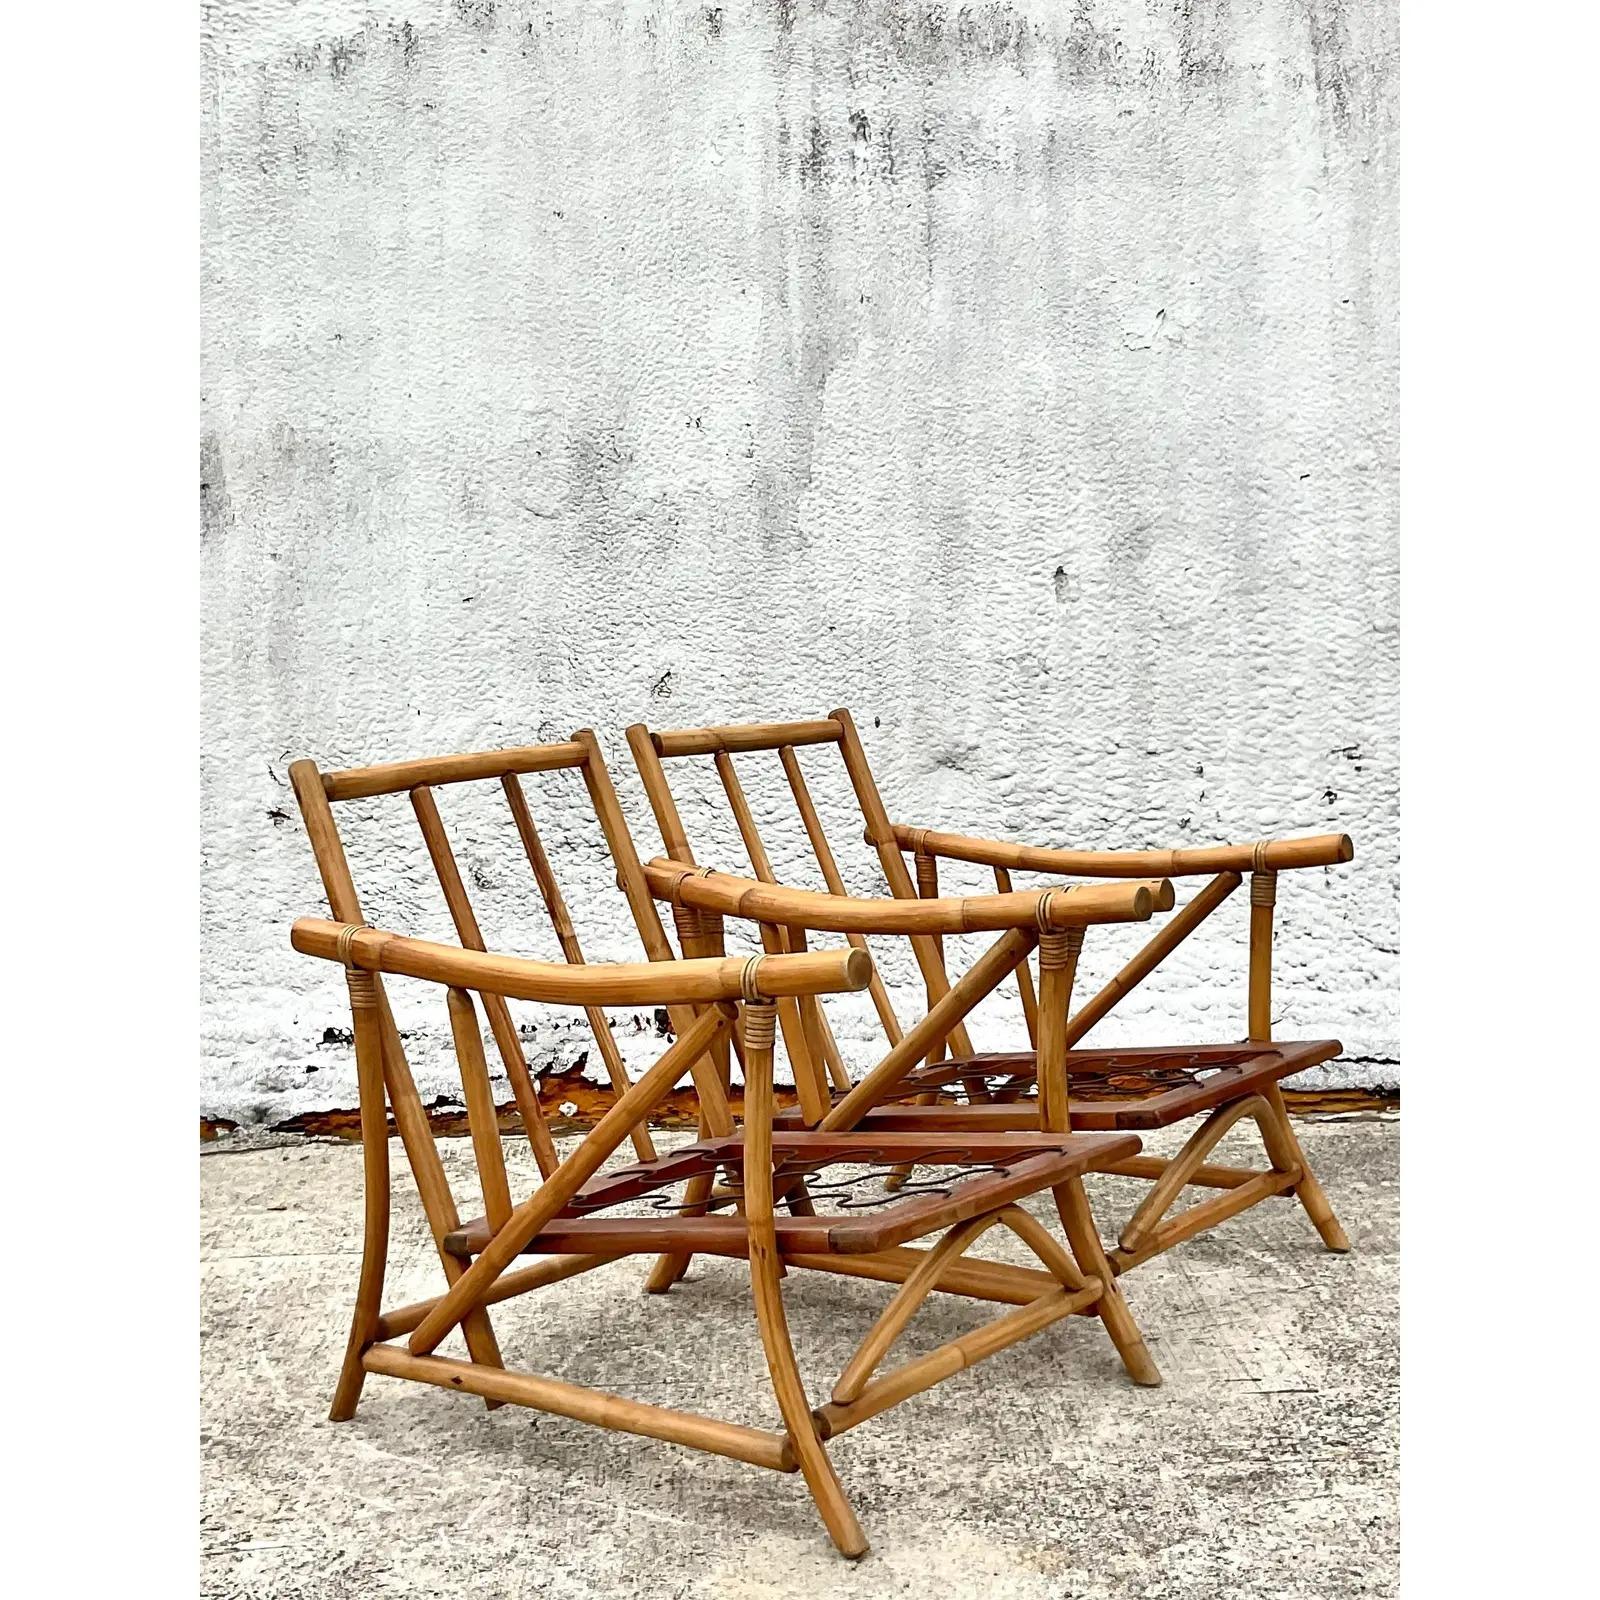 Fantastic pair of vintage Coastal lounge chairs. Beautiful rattan frame with a chic pagoda shape. Acquired from a Palm Beach estate.